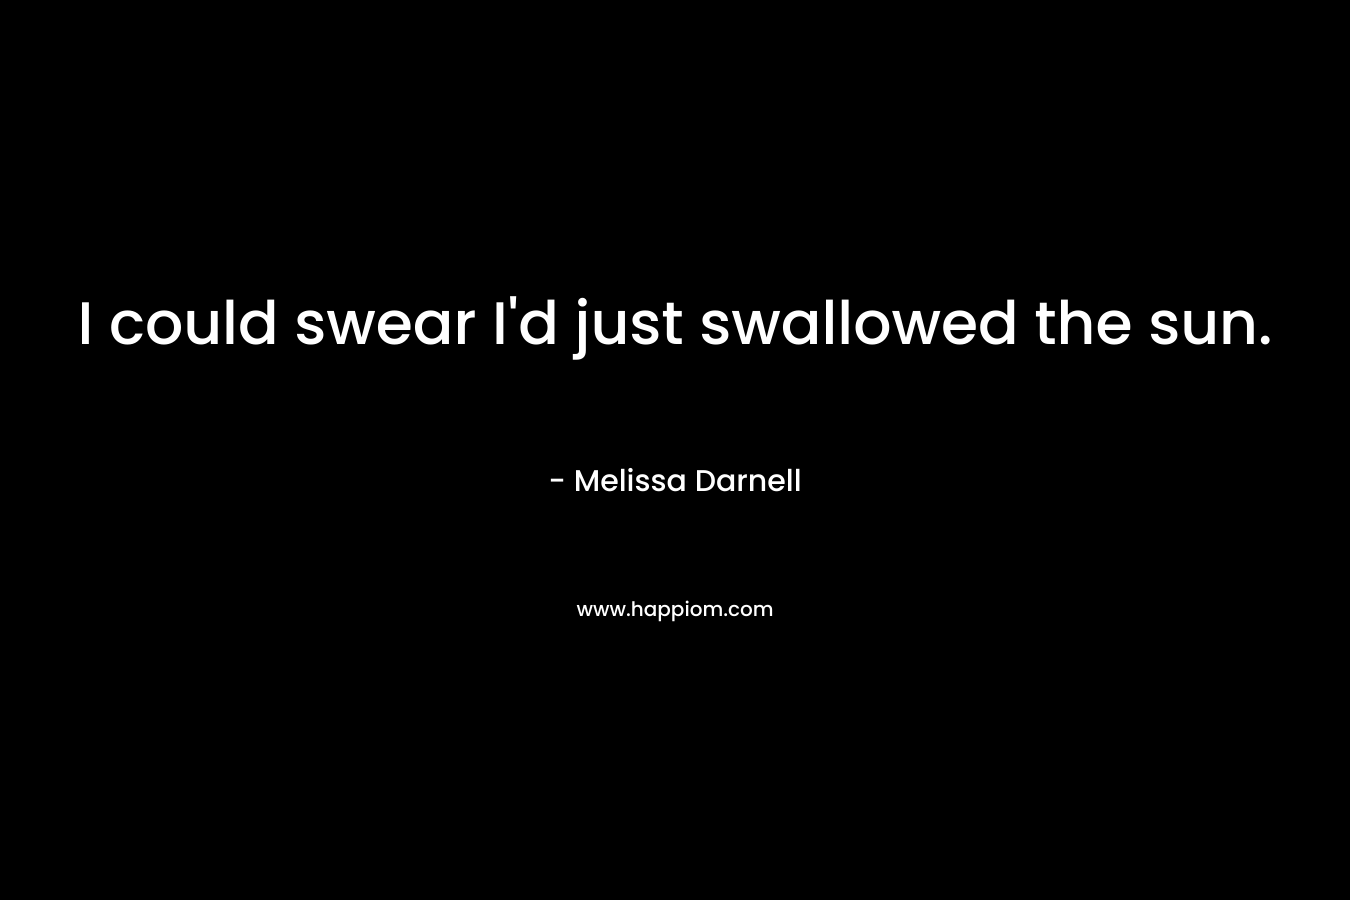 I could swear I’d just swallowed the sun. – Melissa Darnell